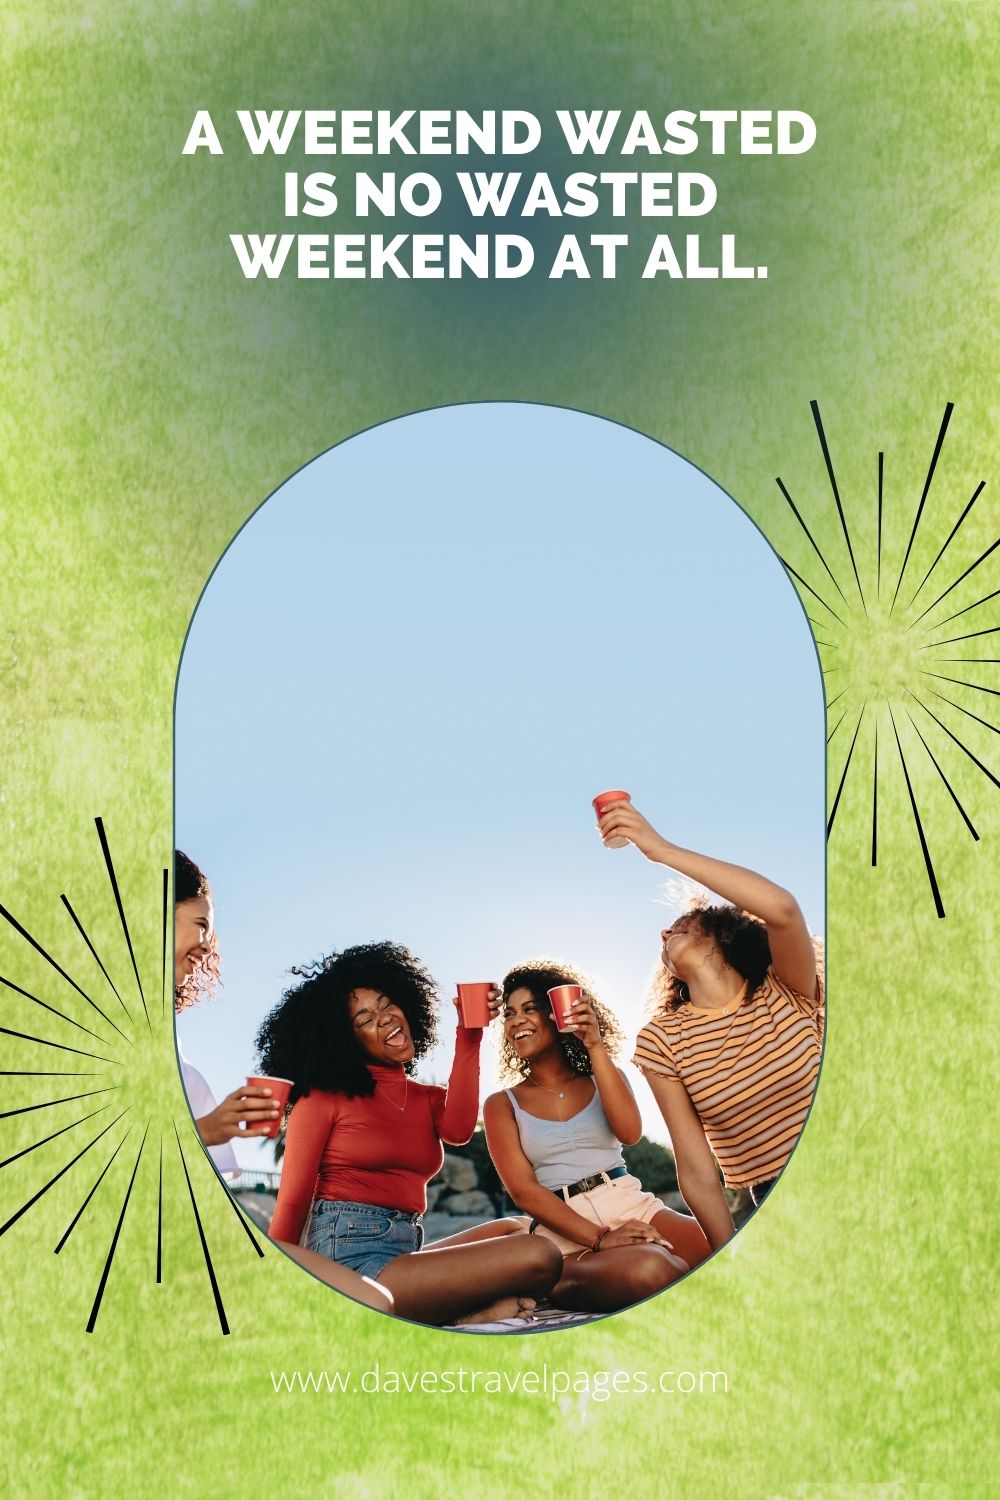 A weekend wasted is not wasted weekend at all | Weekend captions for Instagram